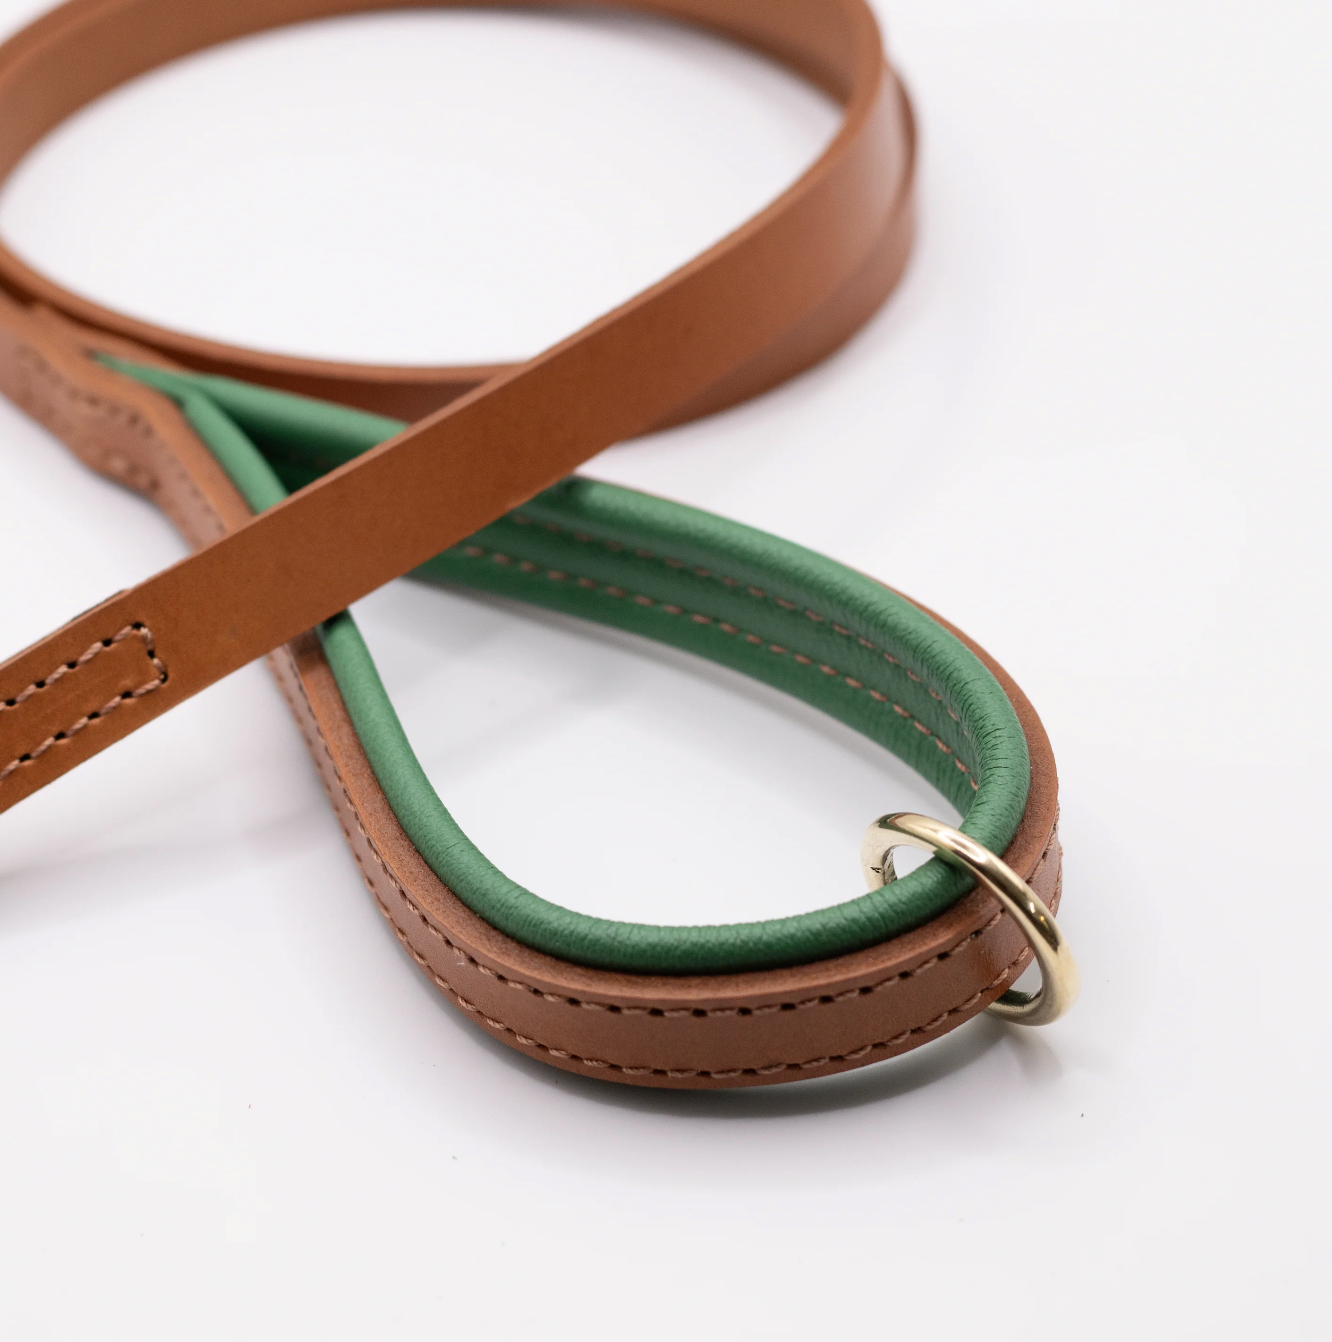 Padded Leather Dog Lead Tan and Clover